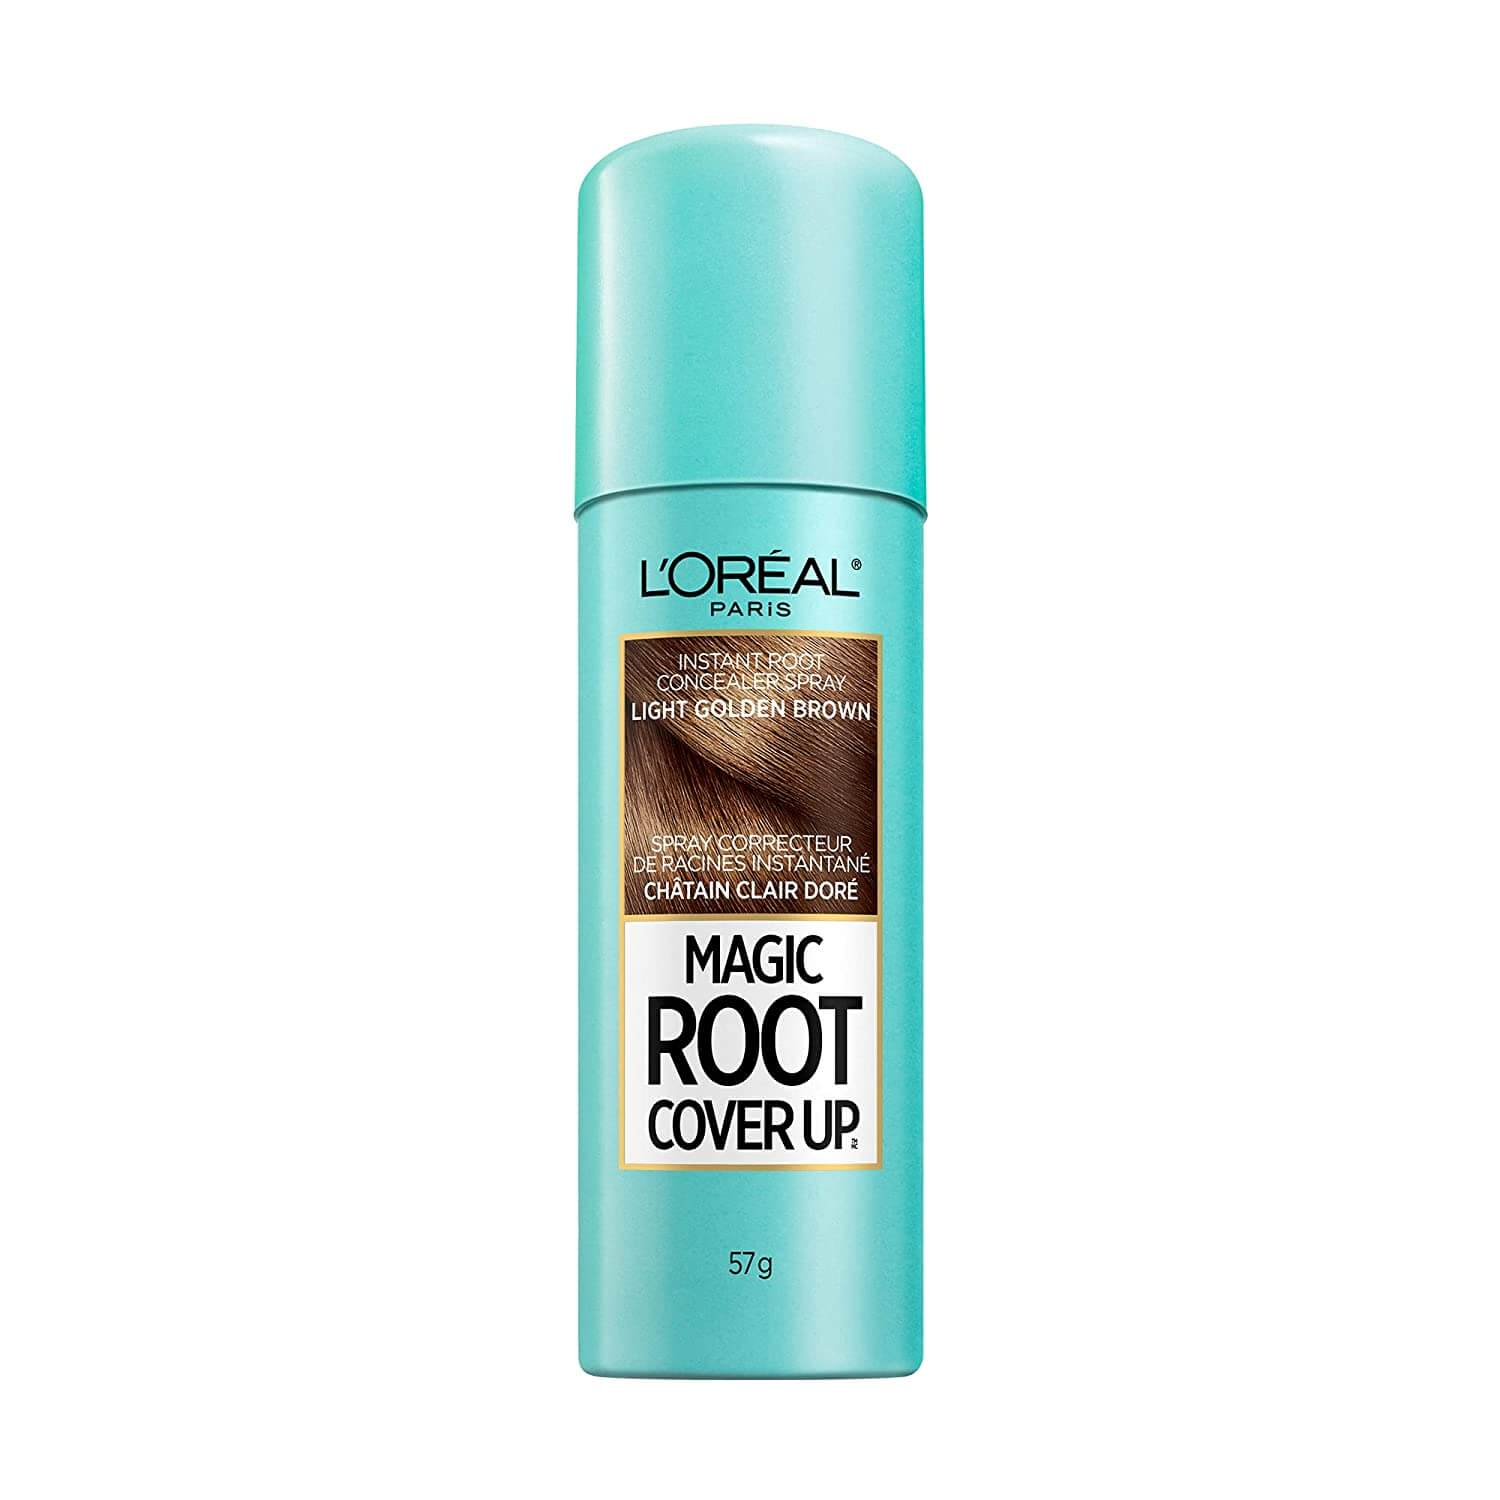 LOreal Root Cover Up  Concealer Spray Light Golden Brown 57g